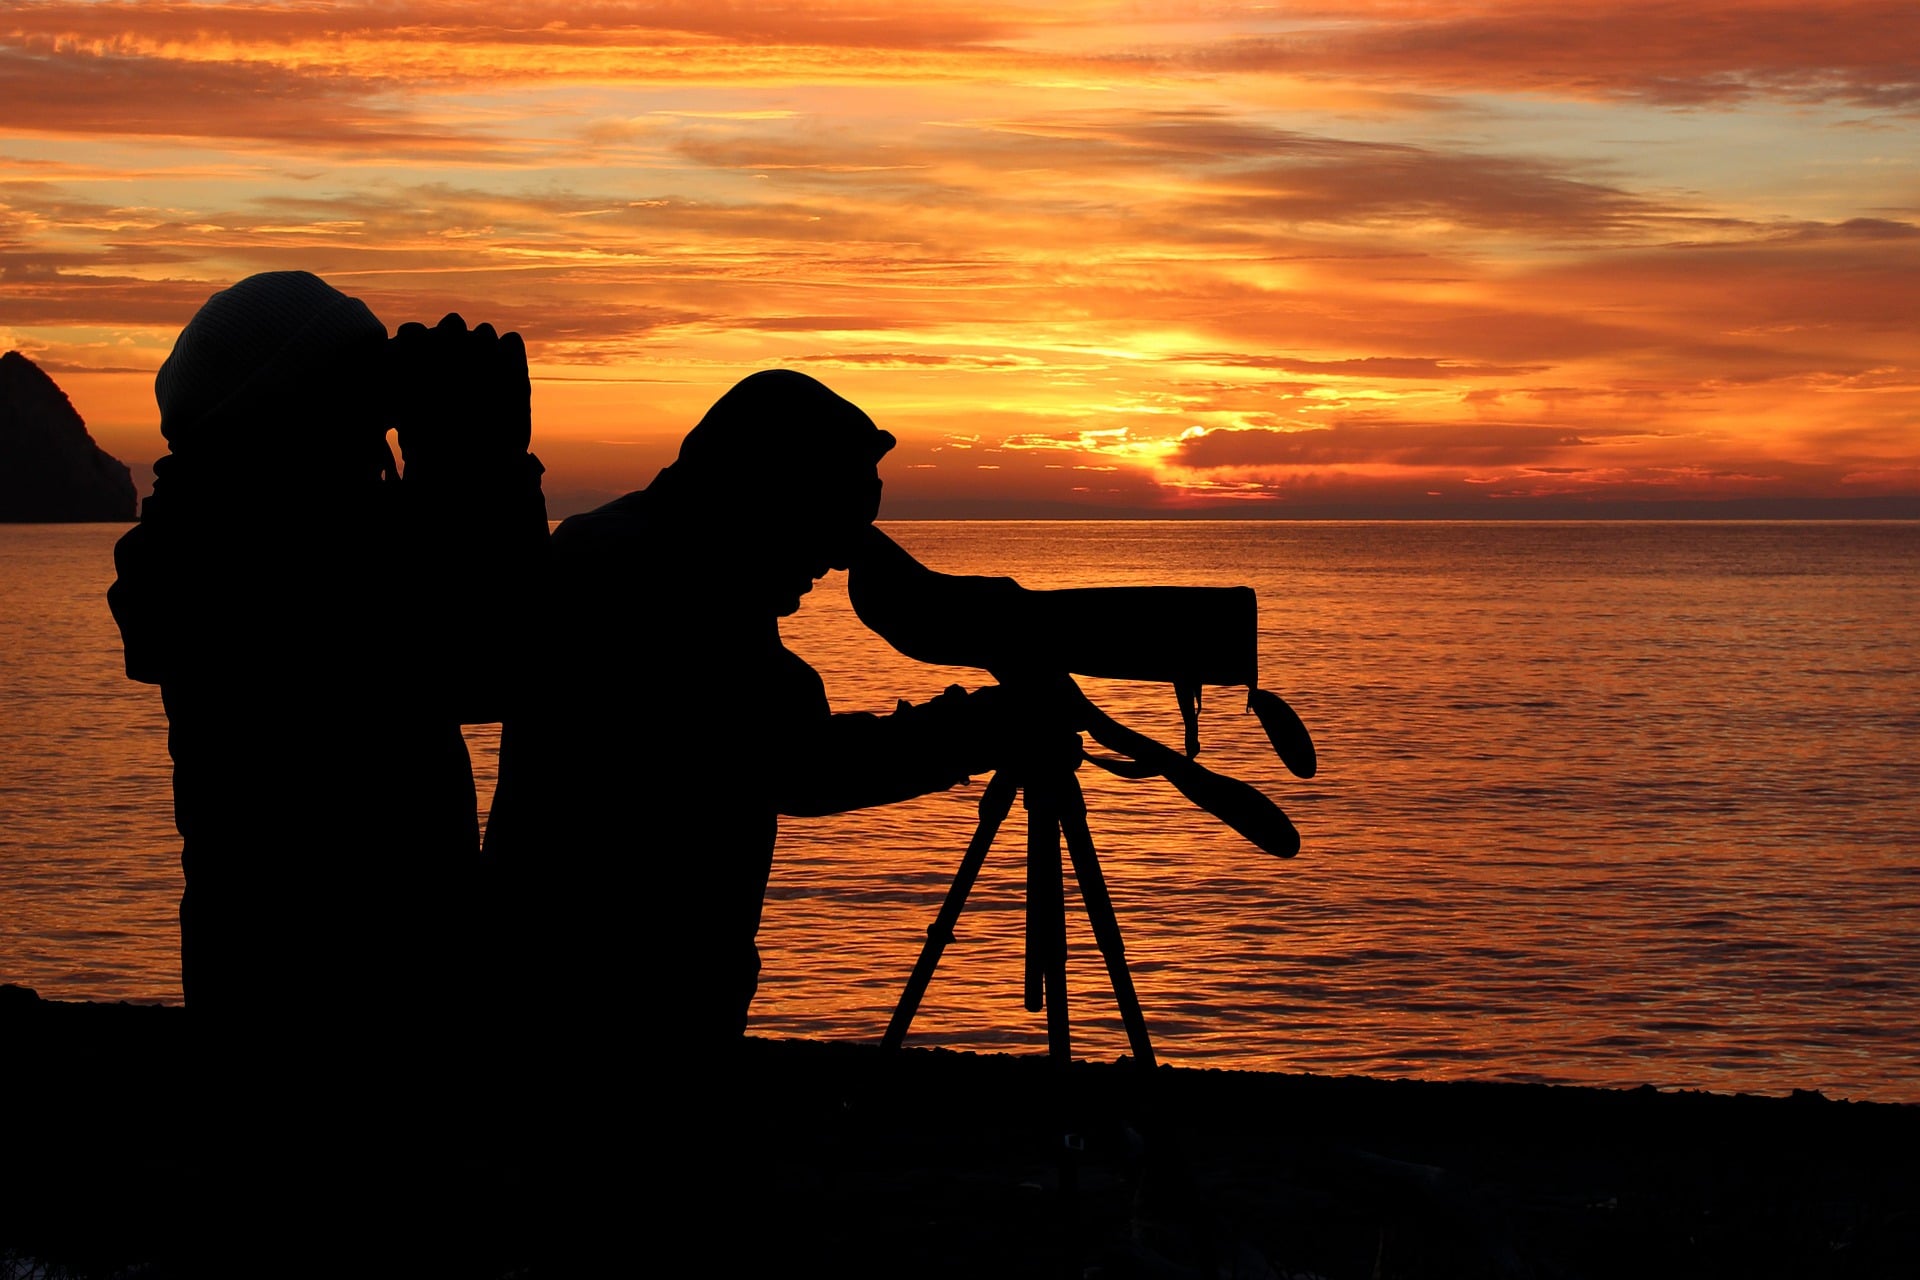 Silhouettes of a man and woman using binoculars